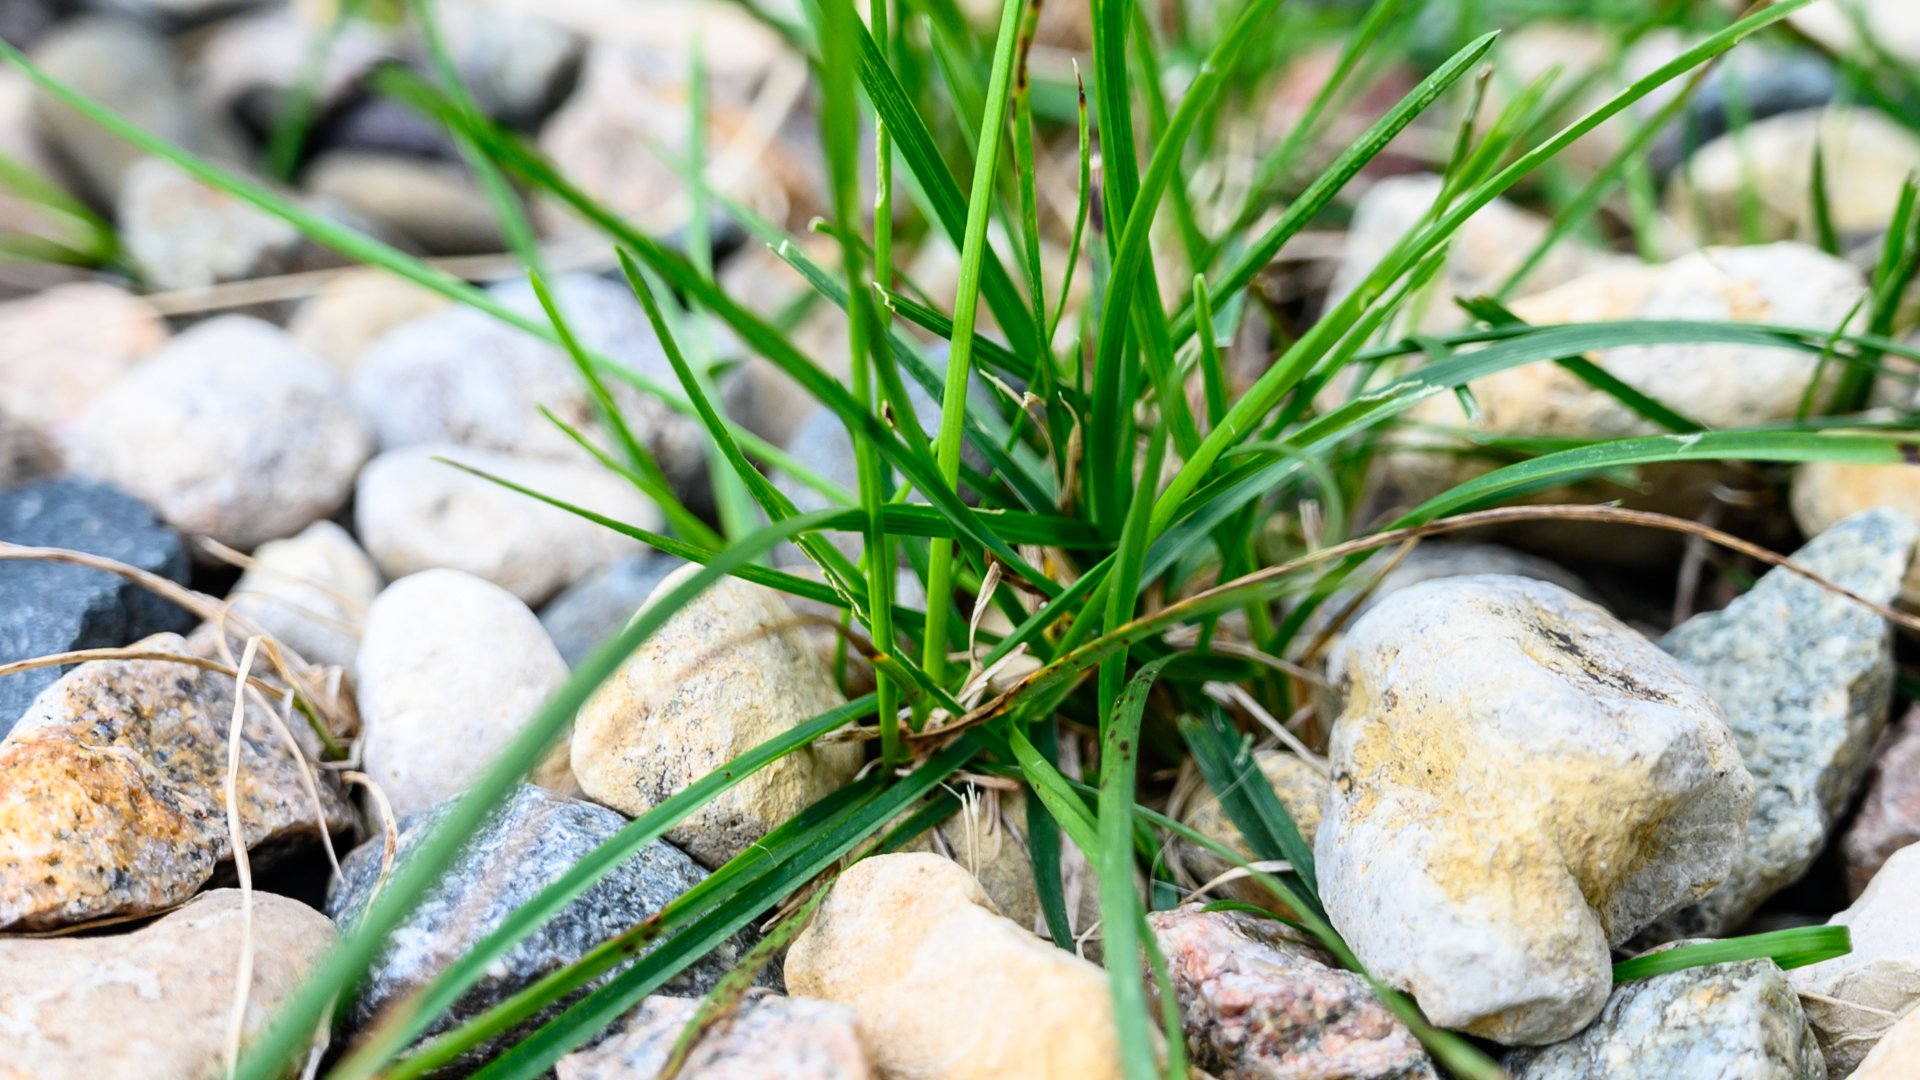 Noticing Weeds in Your Landscape Beds? They Should Be Removed Right Away!